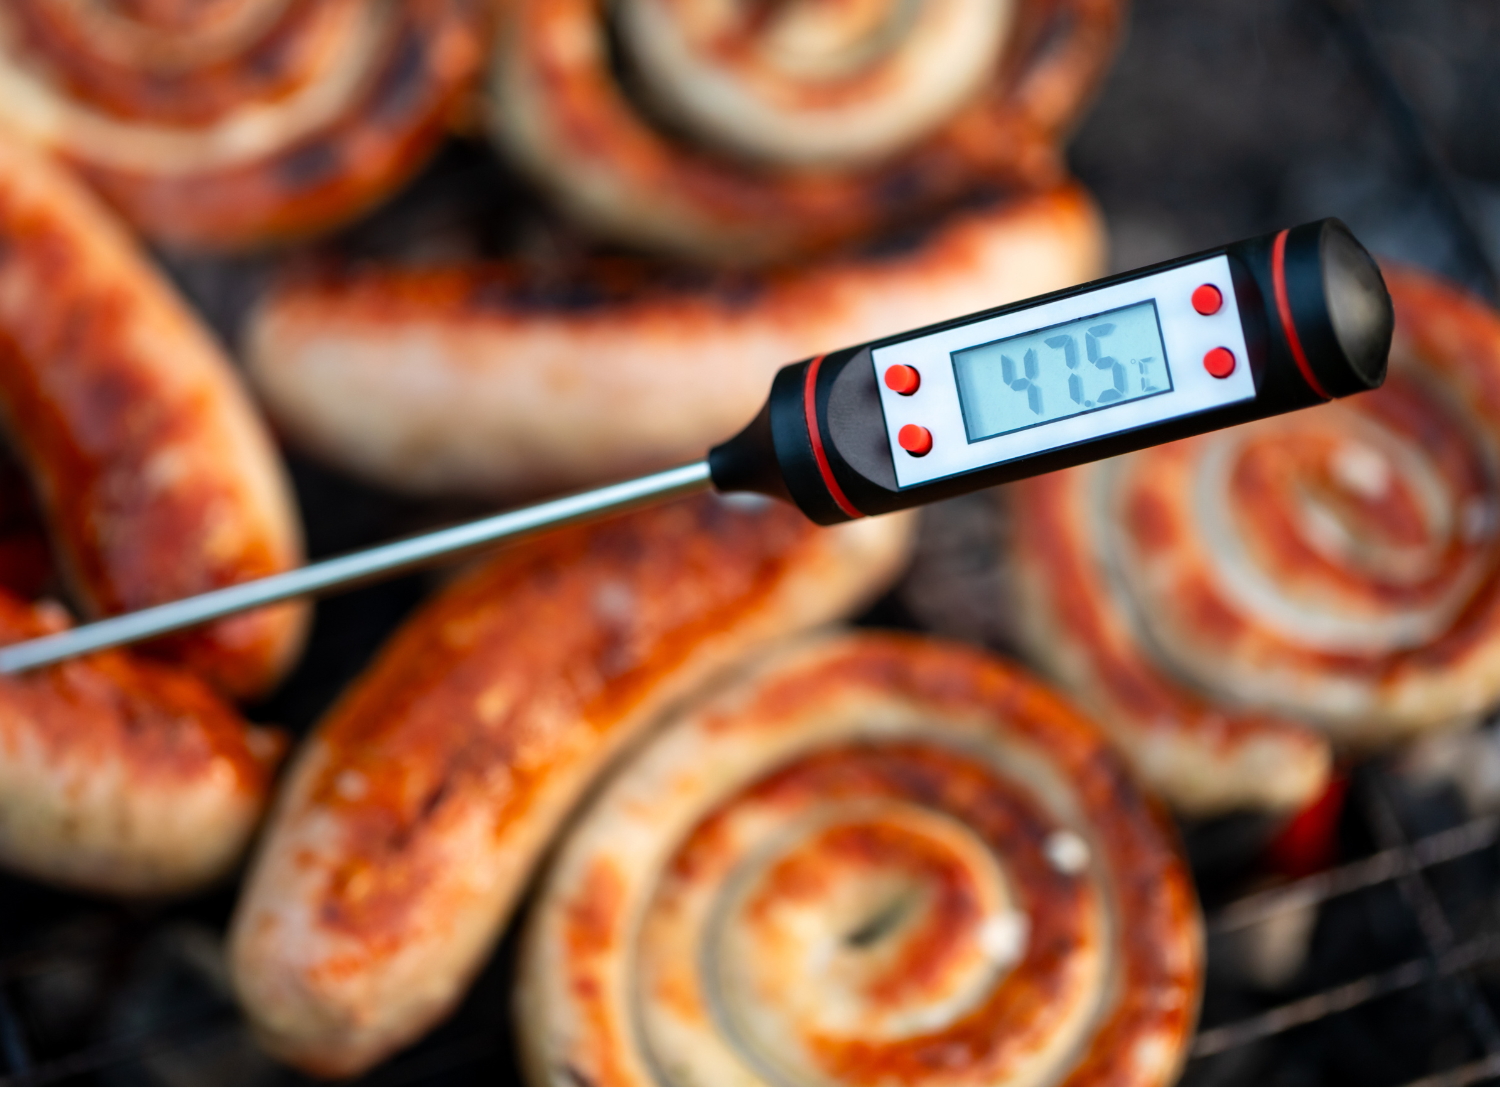 cooking thermometer testing temperature of sausages at 475 degrees